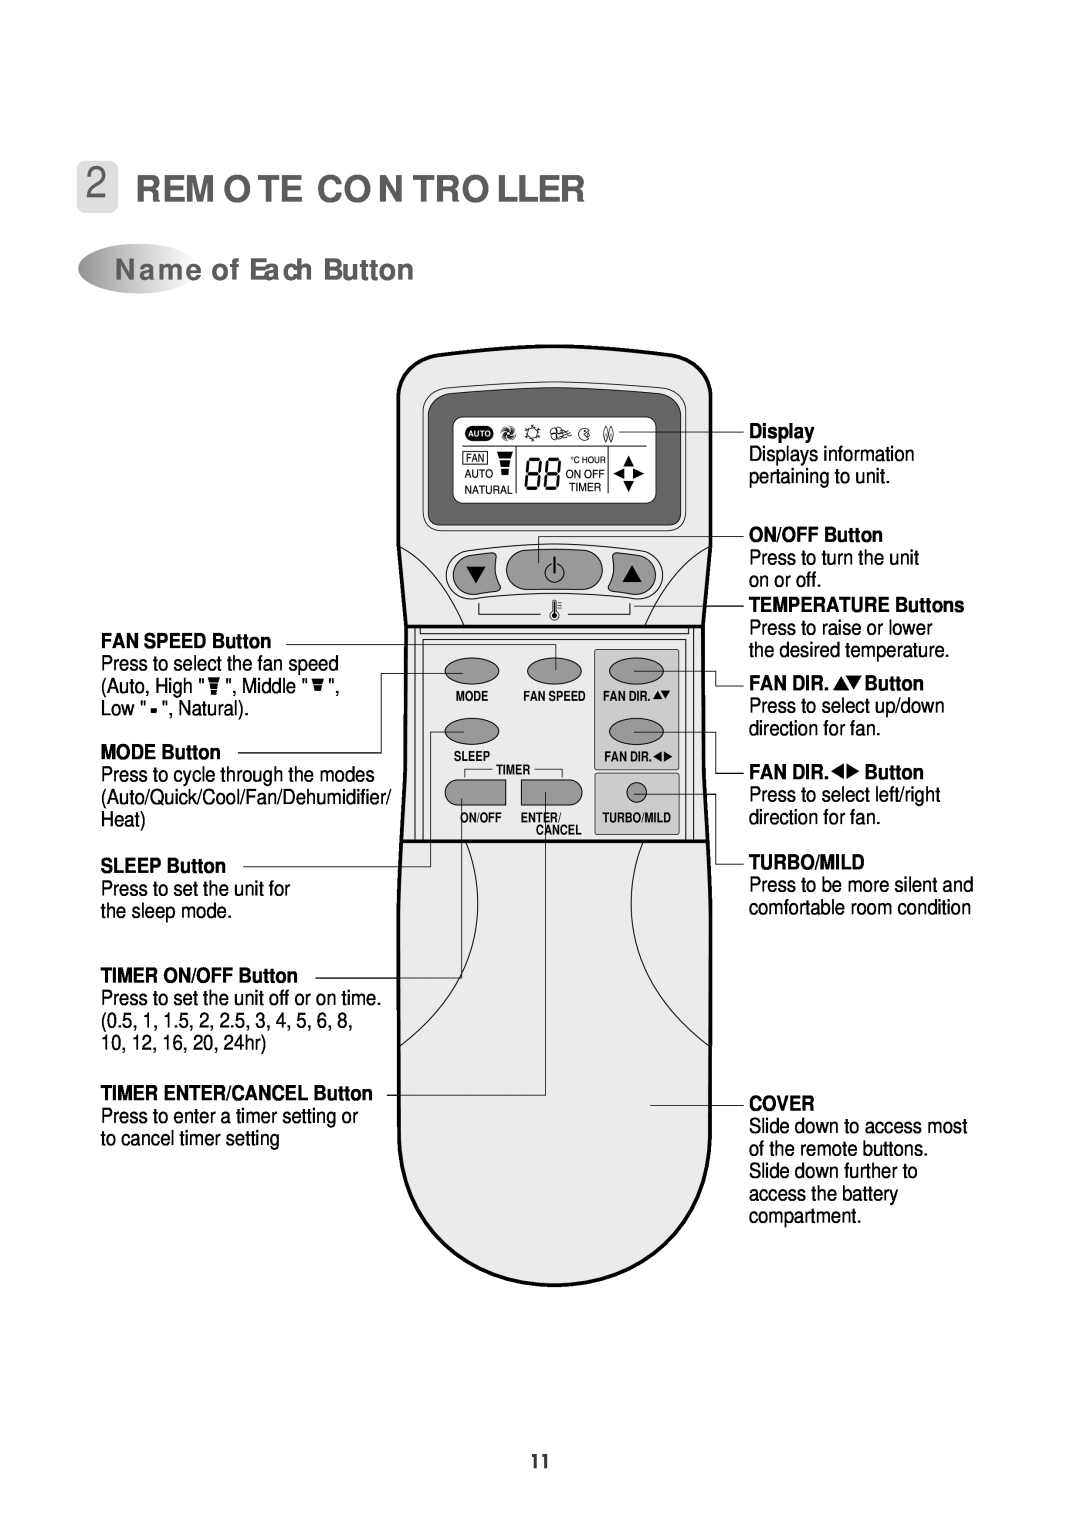 Daewoo DPB-280LH service manual 2REMOTE CONTROLLER, Name of Each Button, Display, pertaining to unit 